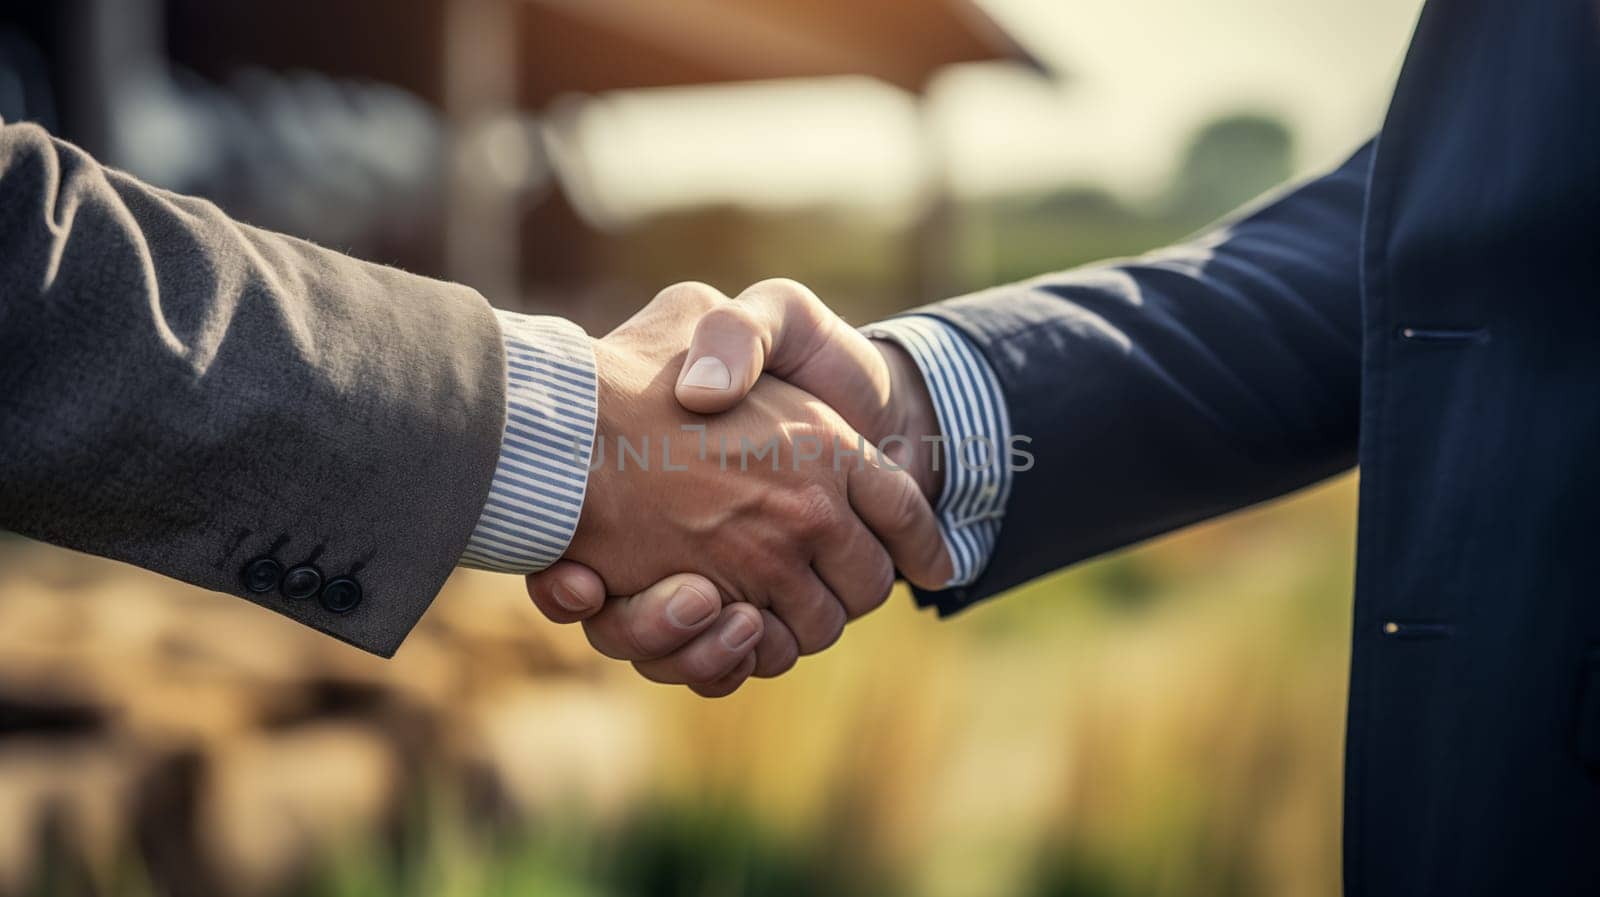 Handshake of two men in suit against the background of a farm by Zakharova